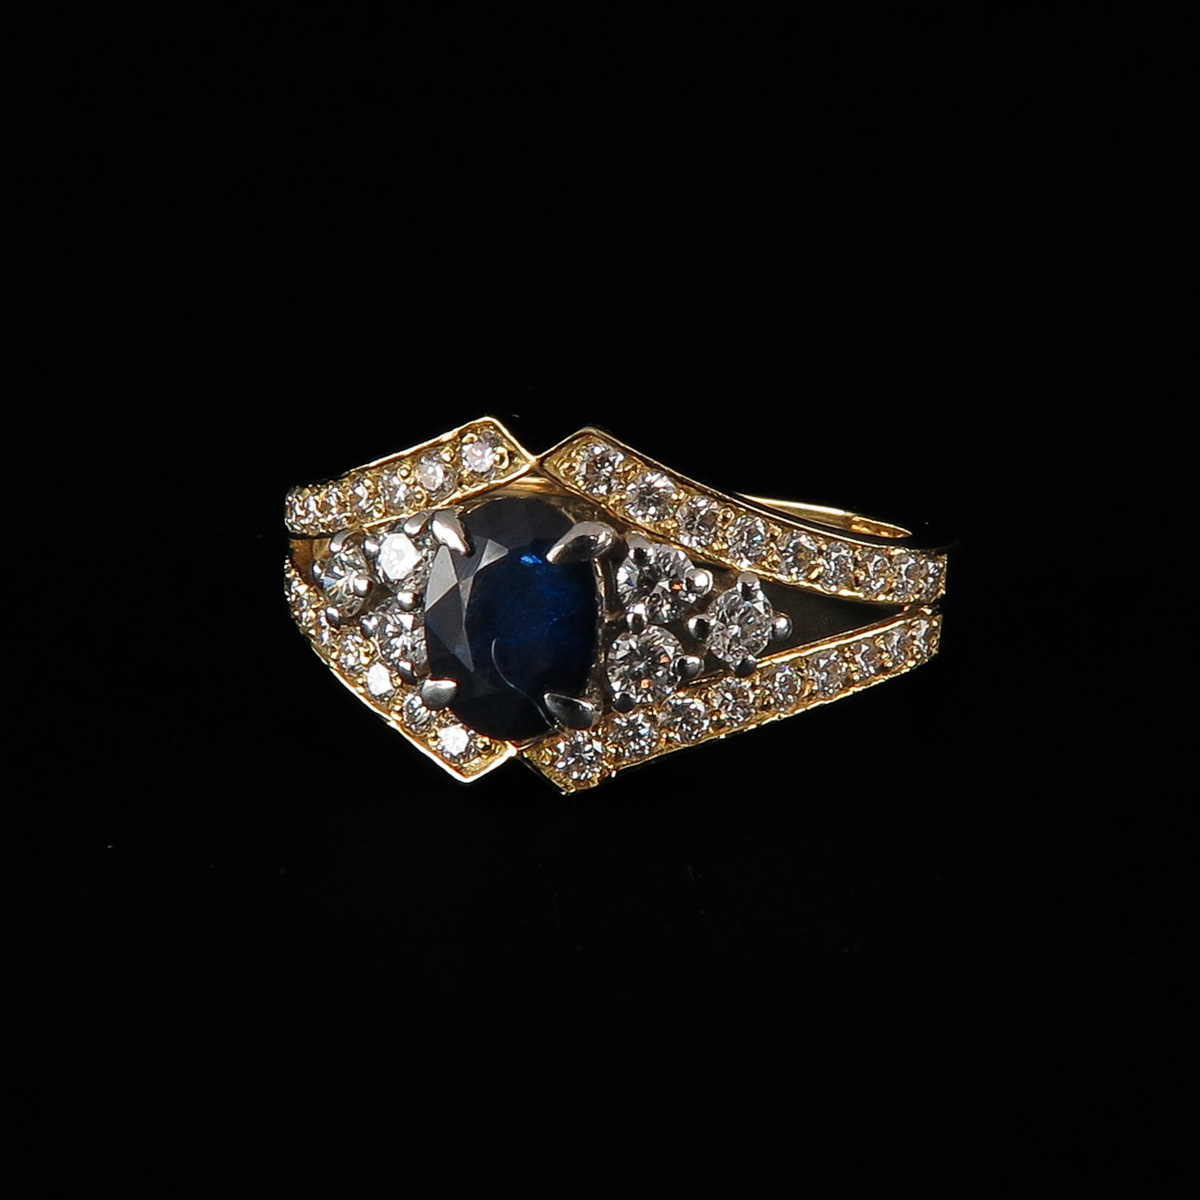 A Ladies Diamond and Sapphire Ring